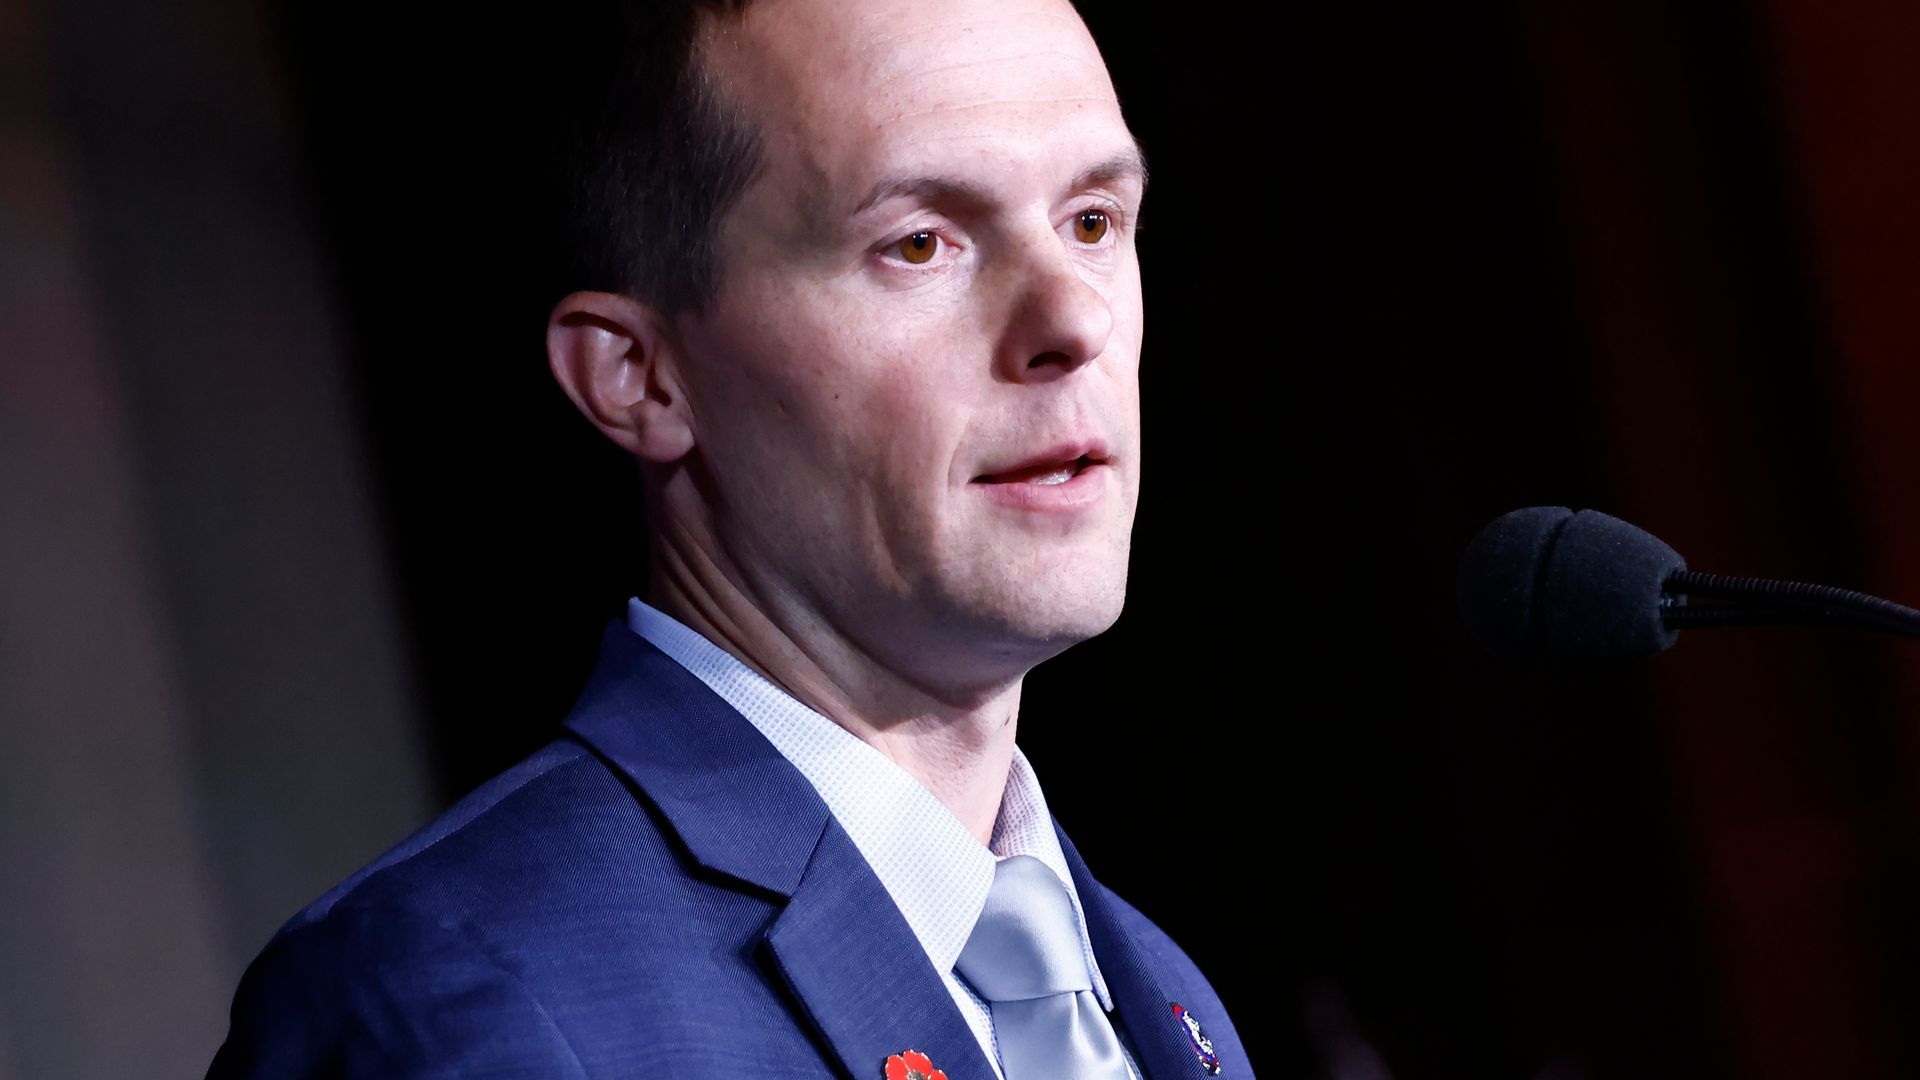 Rep. Jared Golden, D-Maine, announced that he now supports a nationwide assault weapons ban after previously opposing such a measure.